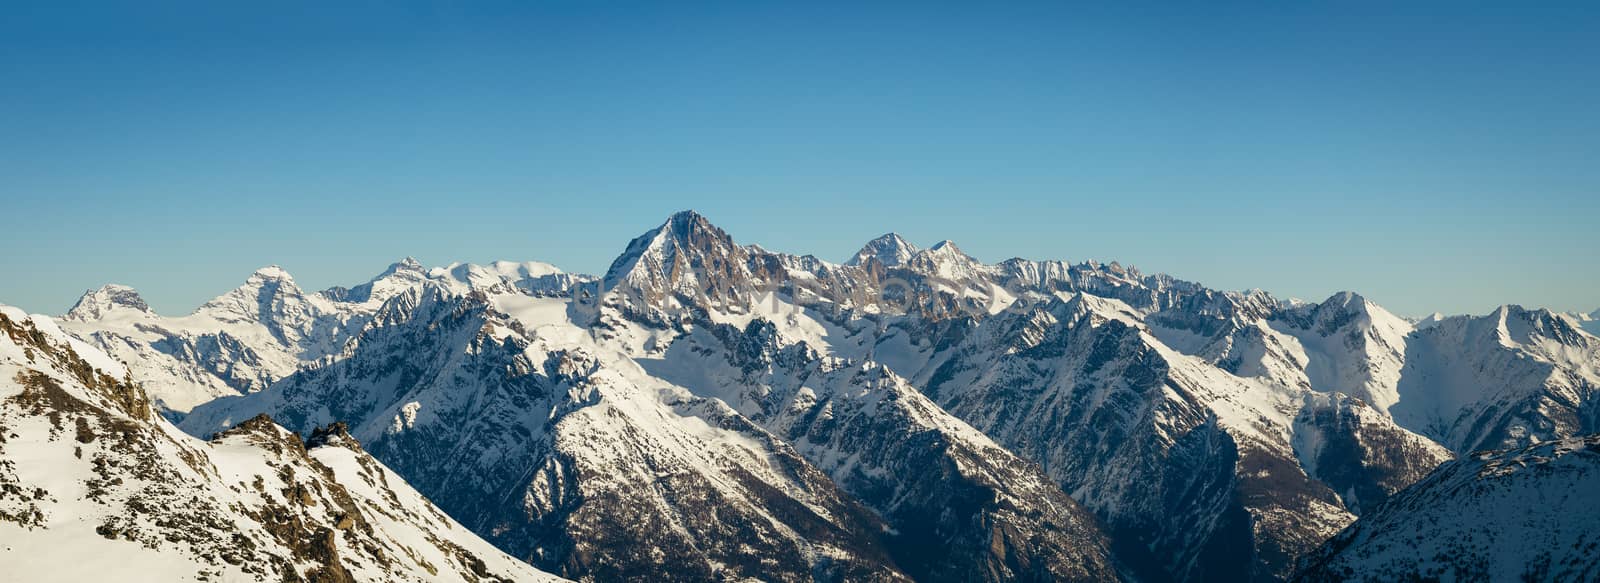 Panorama of the Bietschhorn (3'934m) and surrounding mountains in the swiss alps.